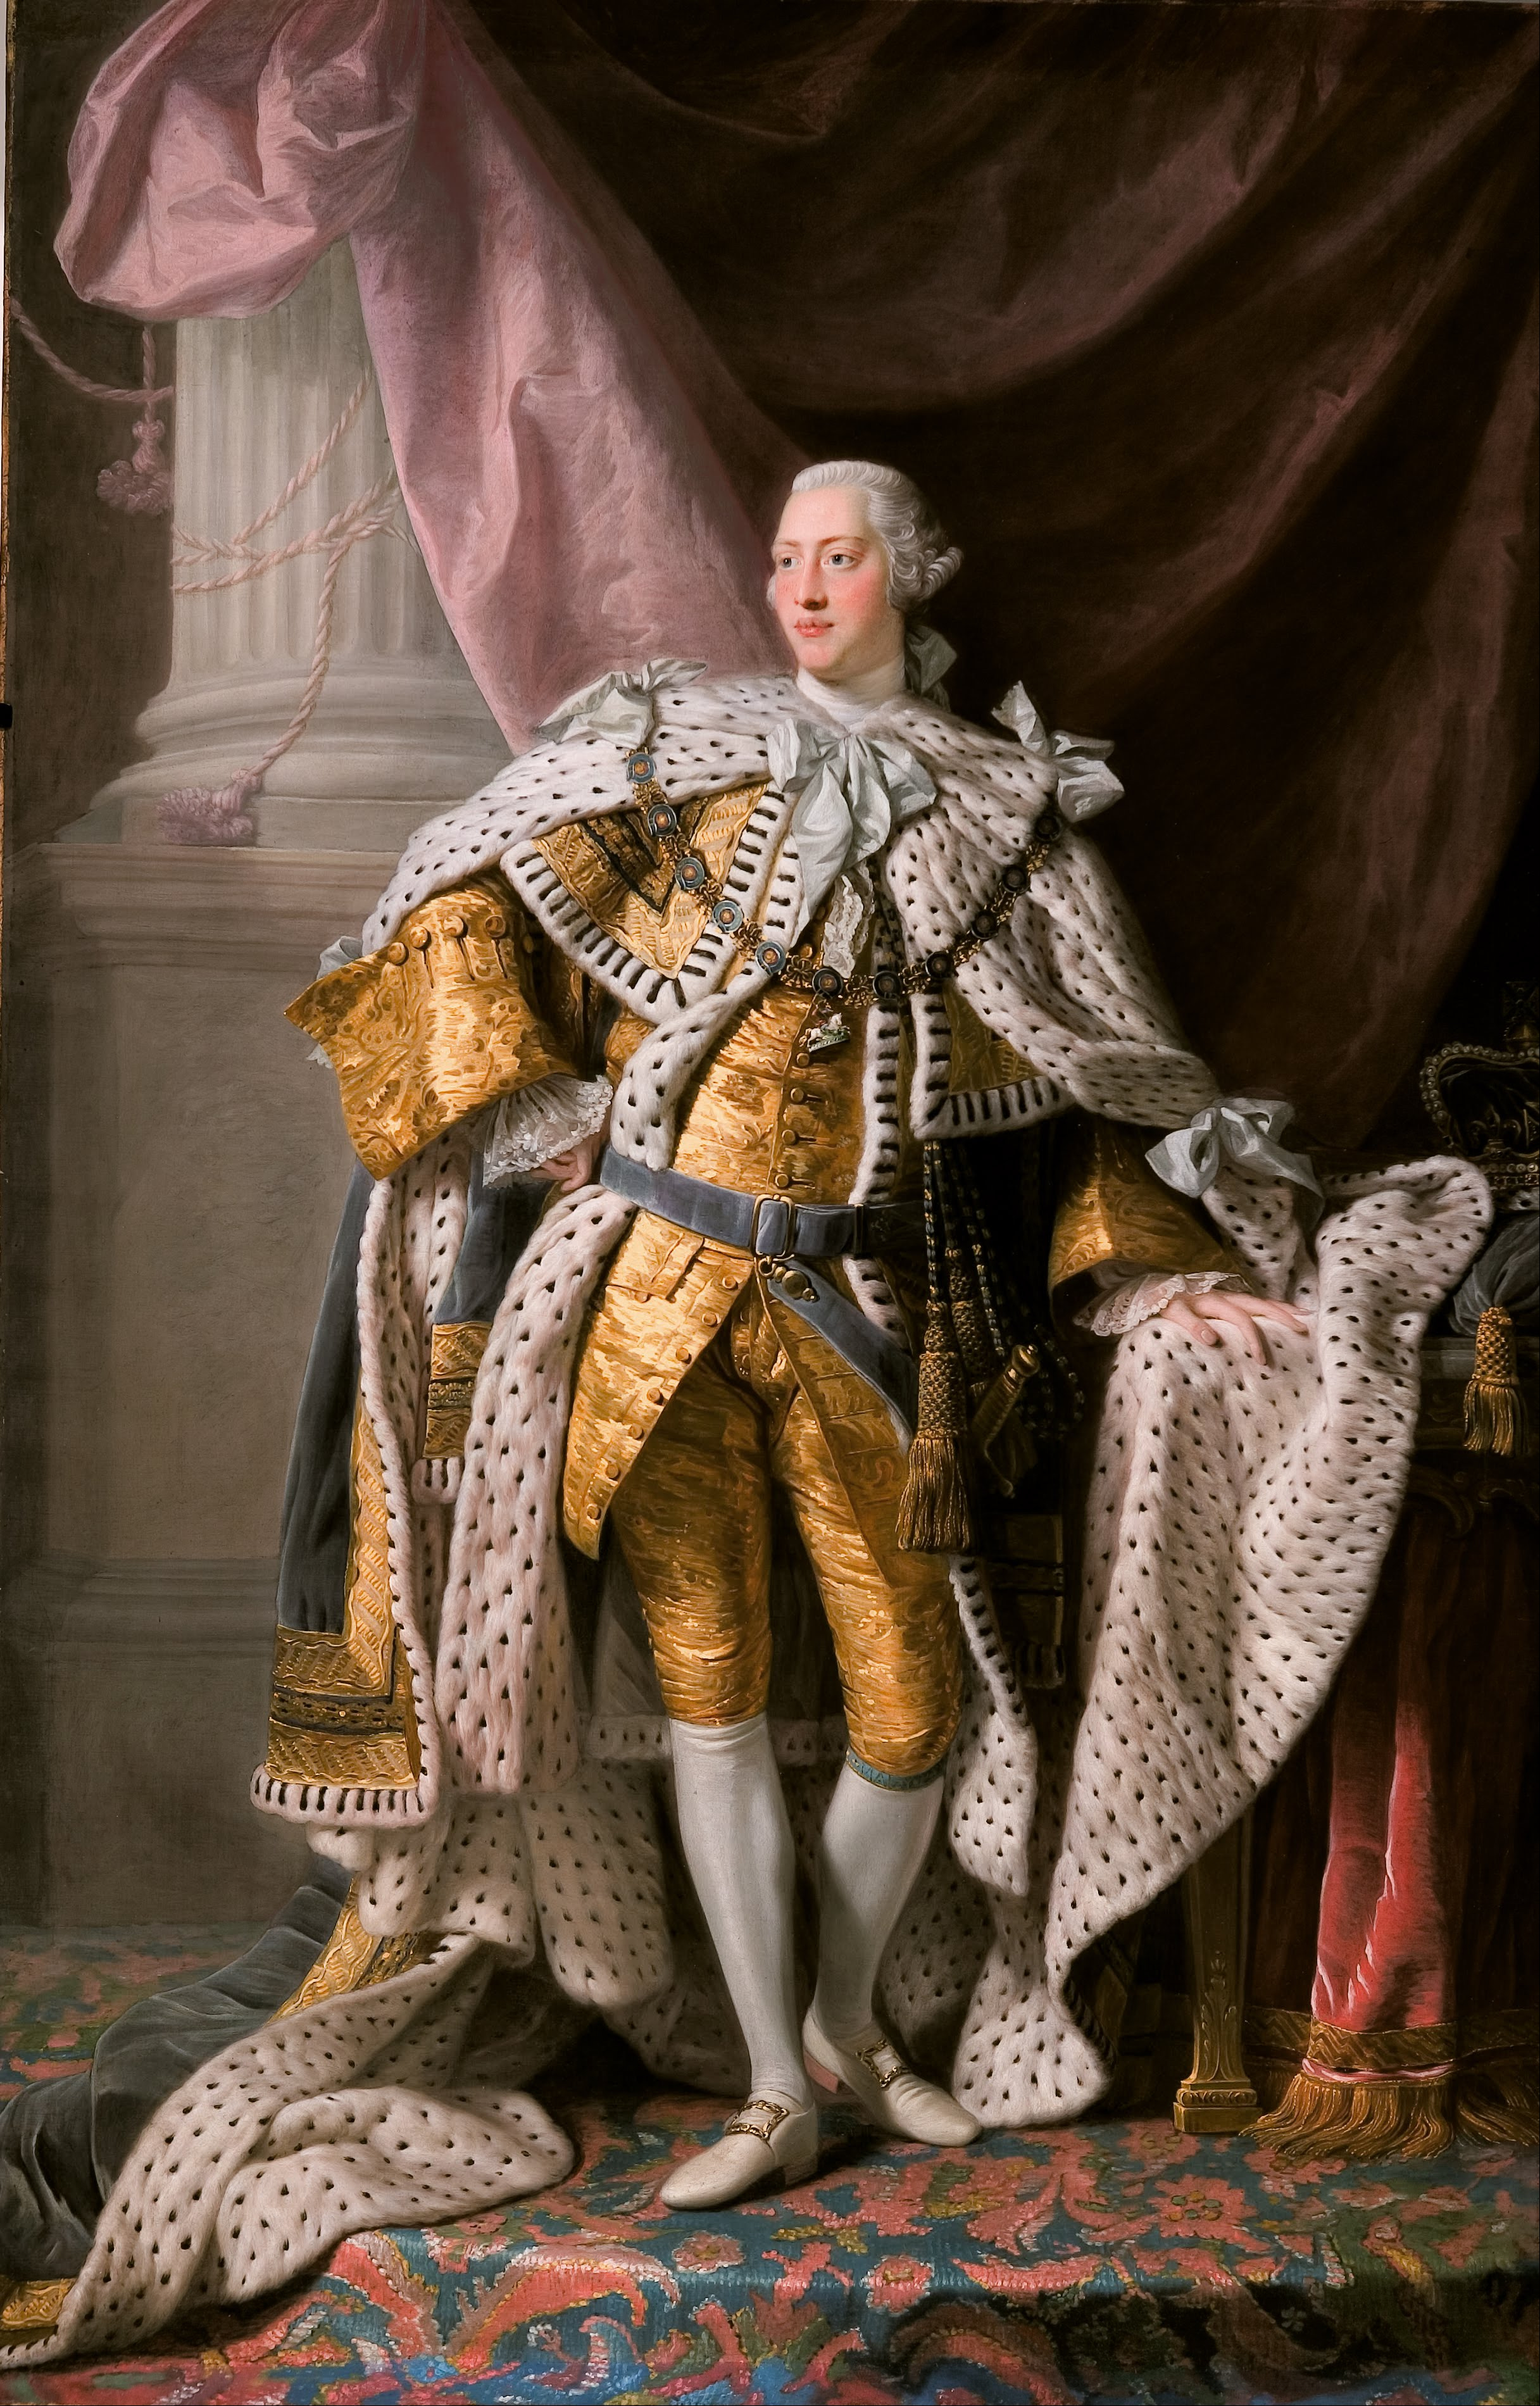 King George as Prince of Wales by Allan Ramsay - c. 1760-65 - 245 x 153.4 cm Royal Collection Trust